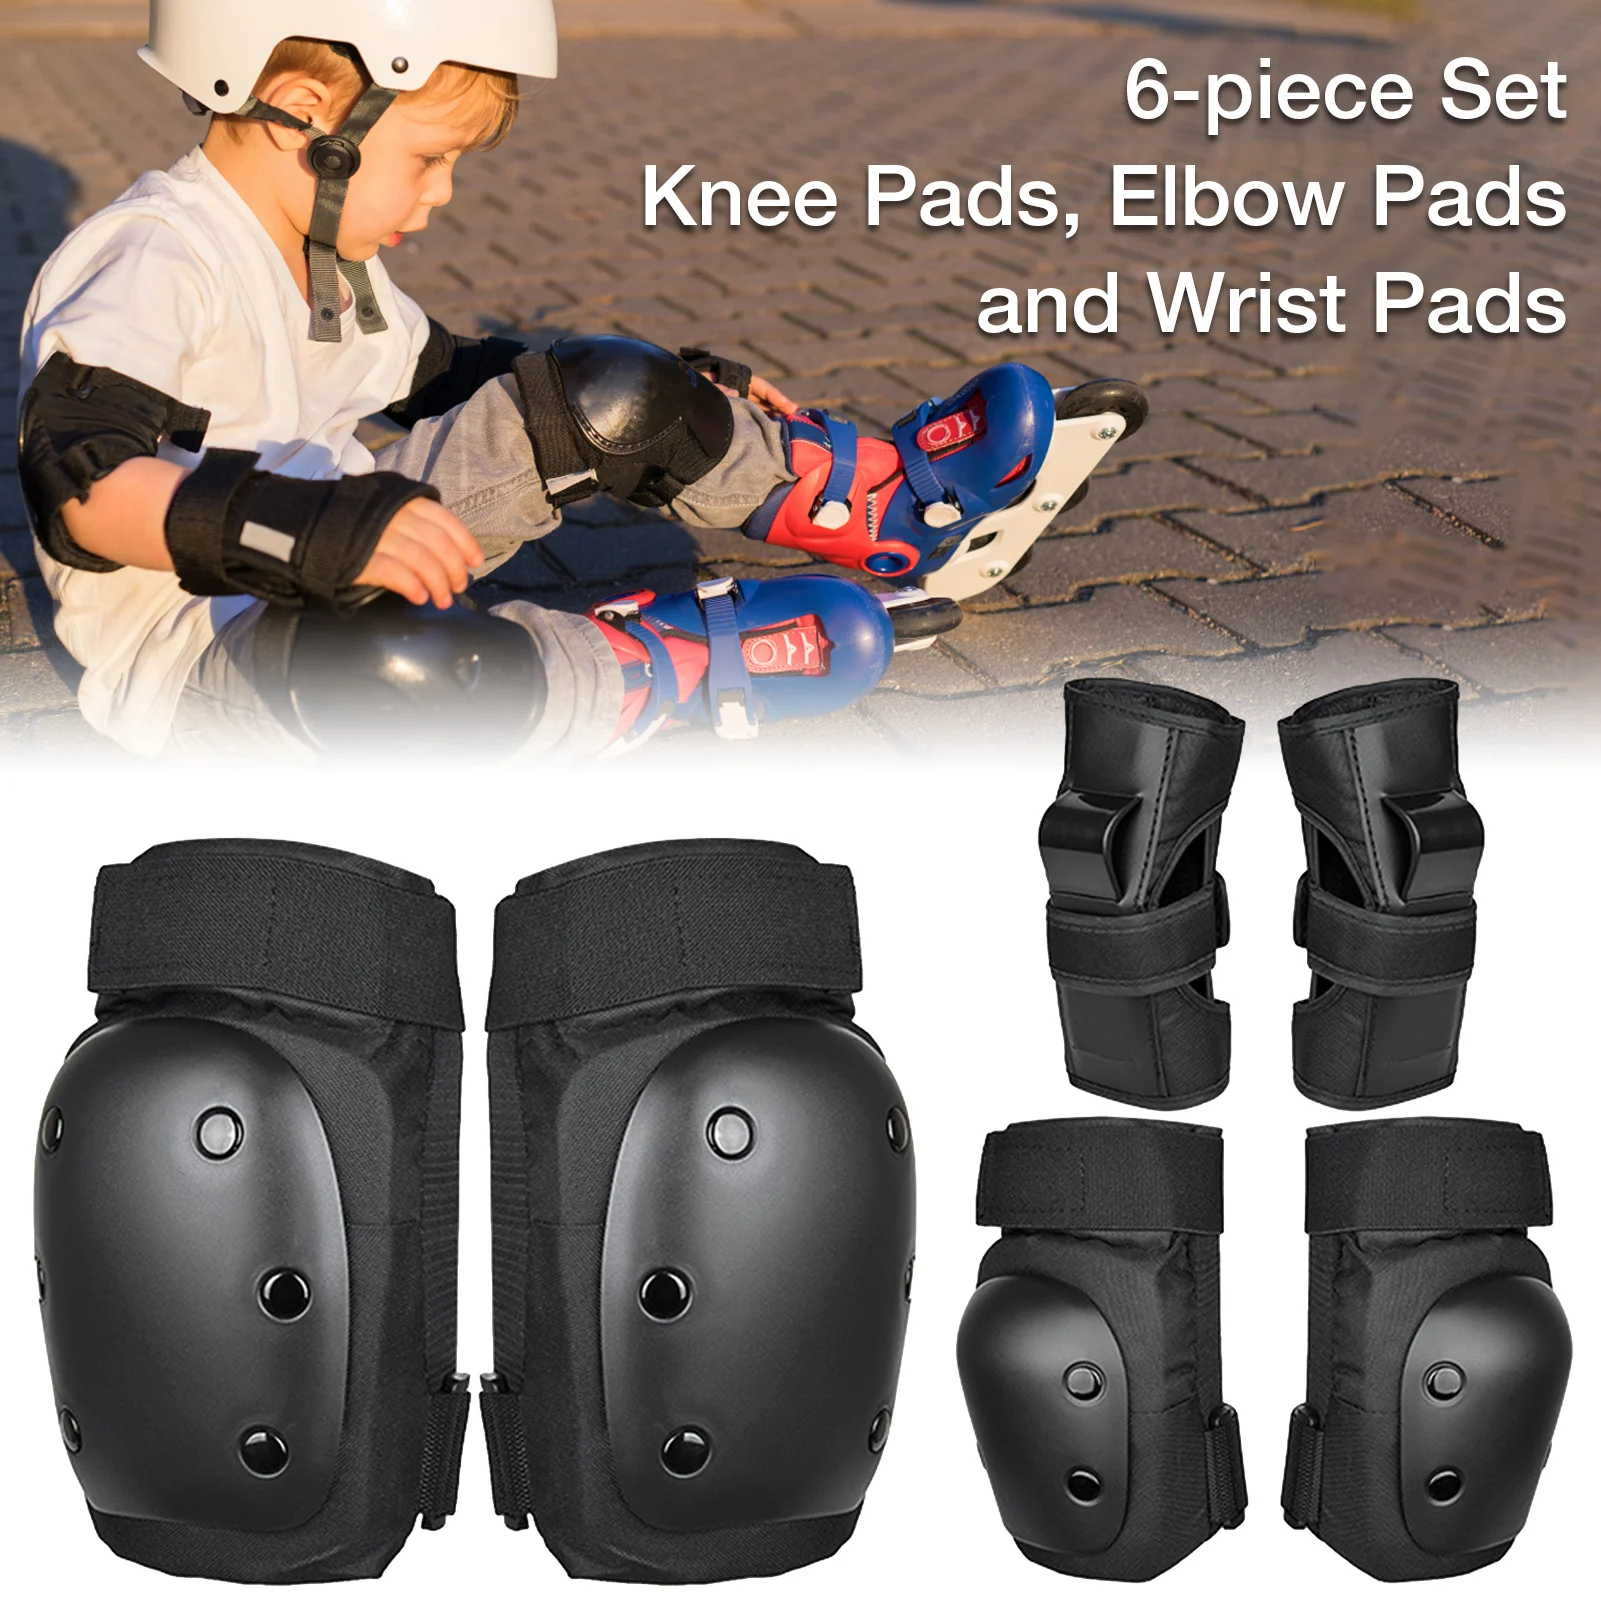 Set of 6 Children Elbow Wrist Knee Pads Sport Safety Protective Gear Guard Kids. 